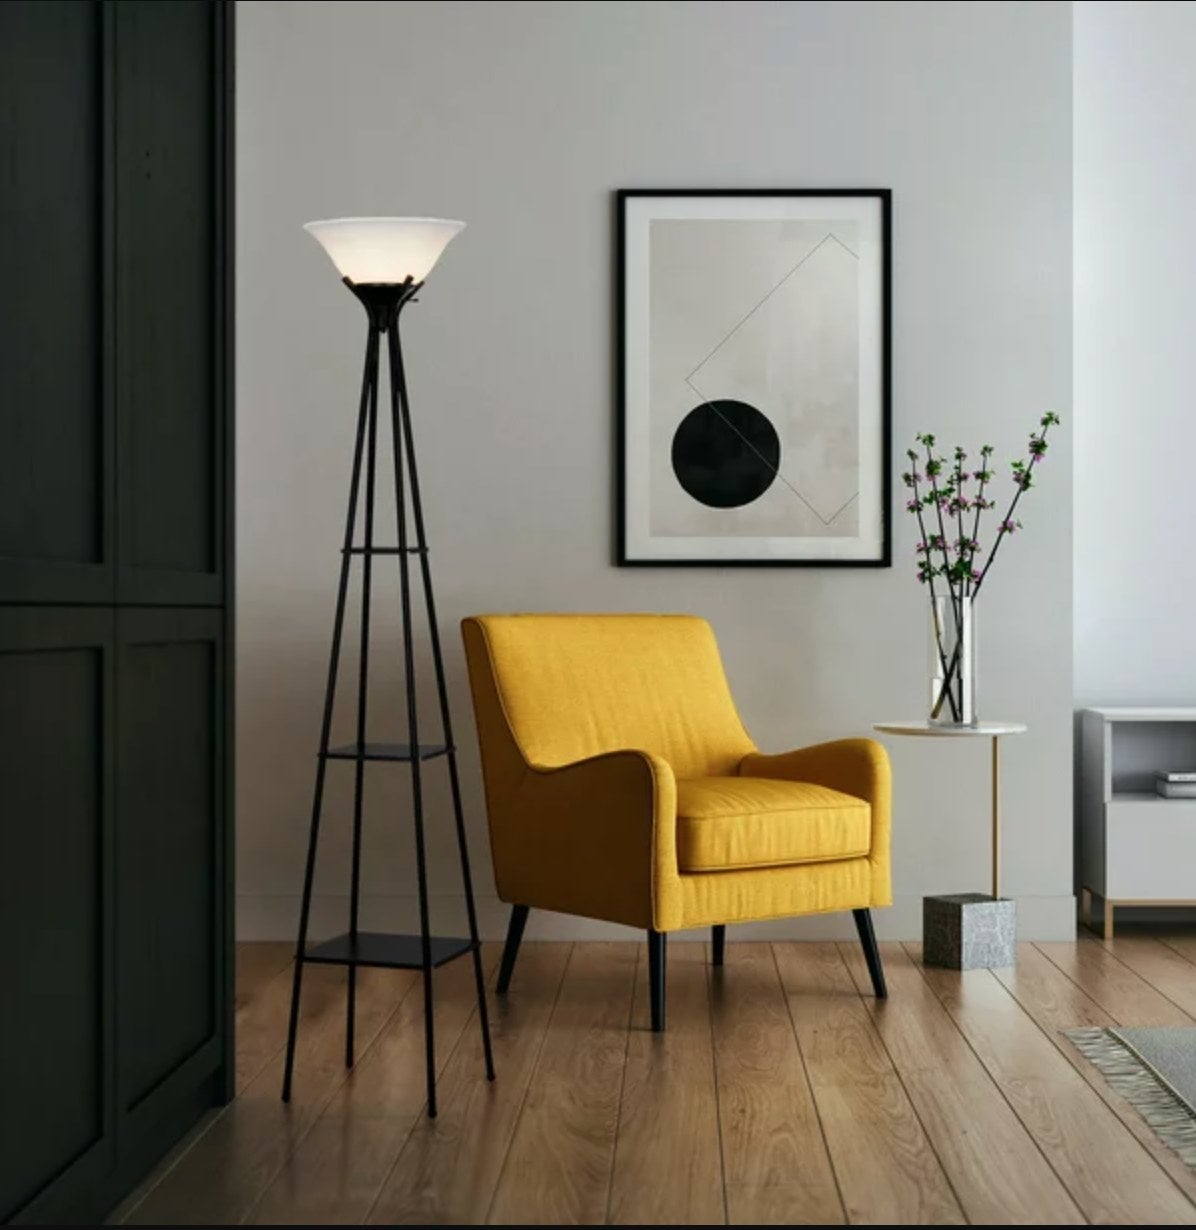 the black lamp next to a yellow easy chair in a decorated living space